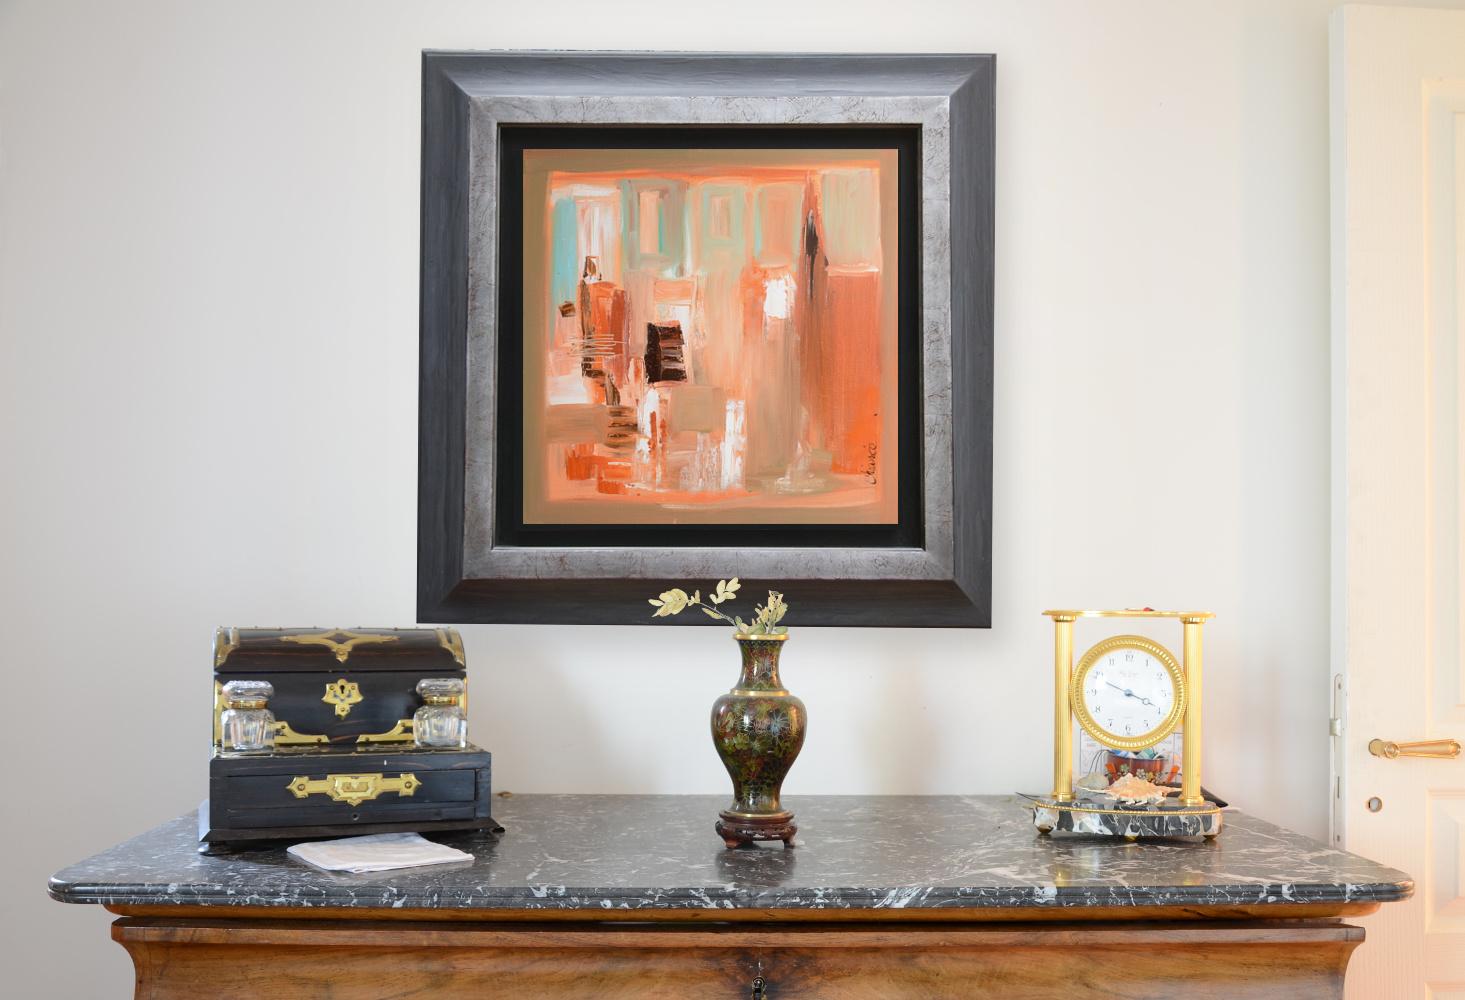 This piece is framed with a simple black wooden L-frame (silver-gilded cavetto-moulded wooden frame on-demand, with a surcharge and delay).

Chicorée is a French artist, mostly influenced by William Turner, Zao Wou-Ki, Georges Mathieu, and colors of